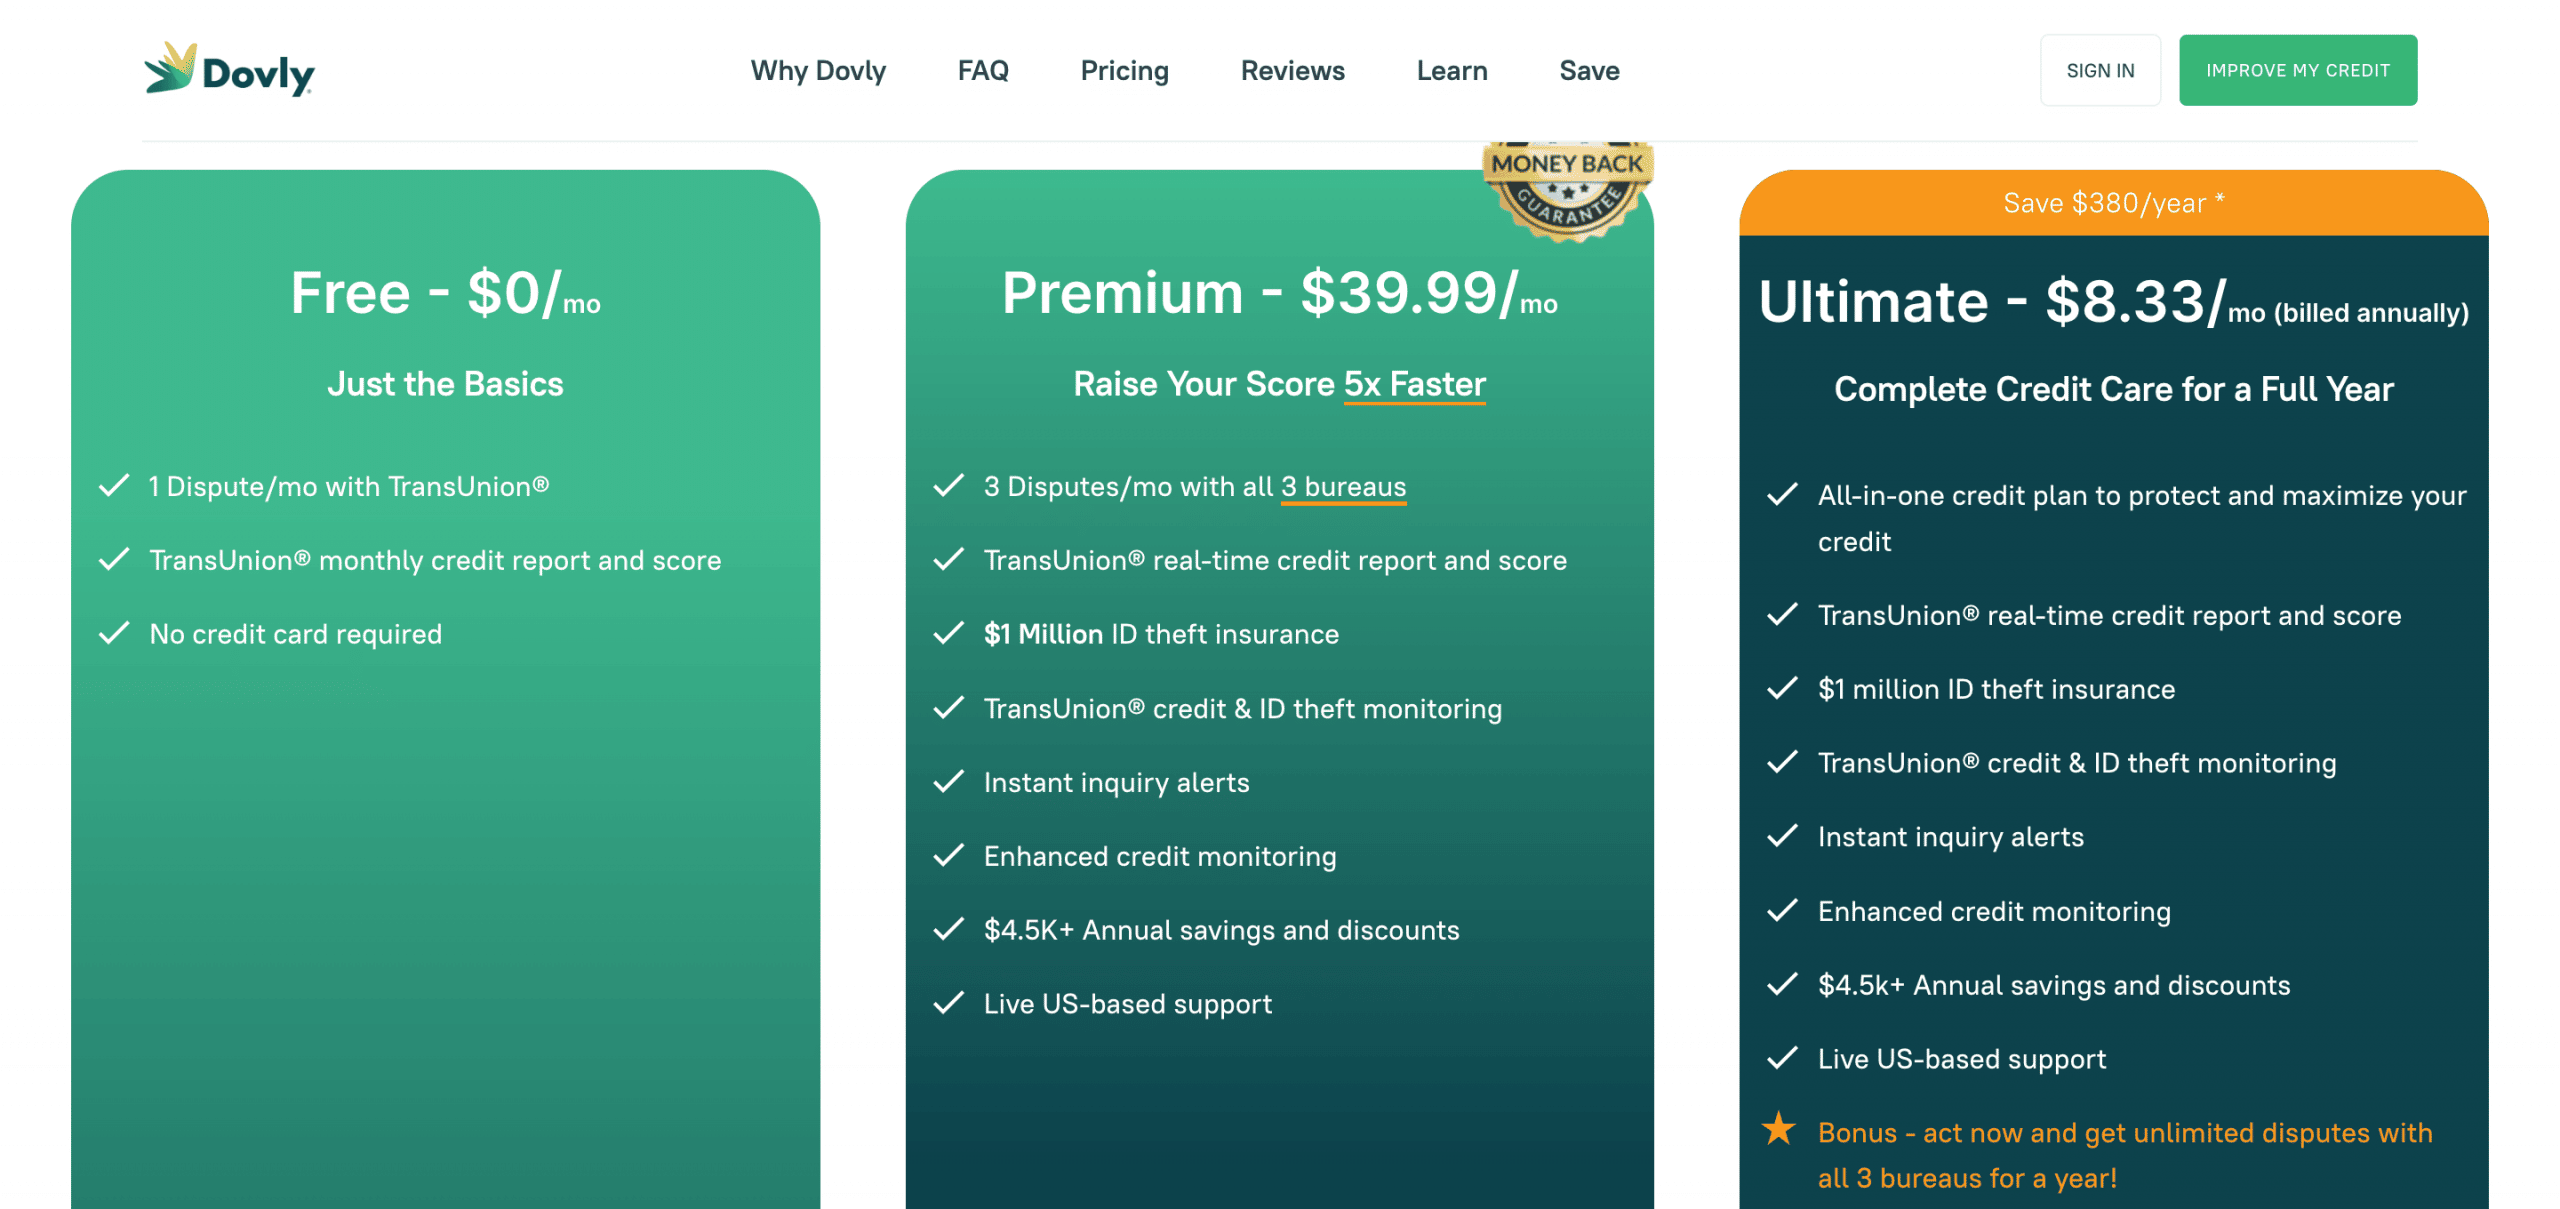 Dovly Pricing